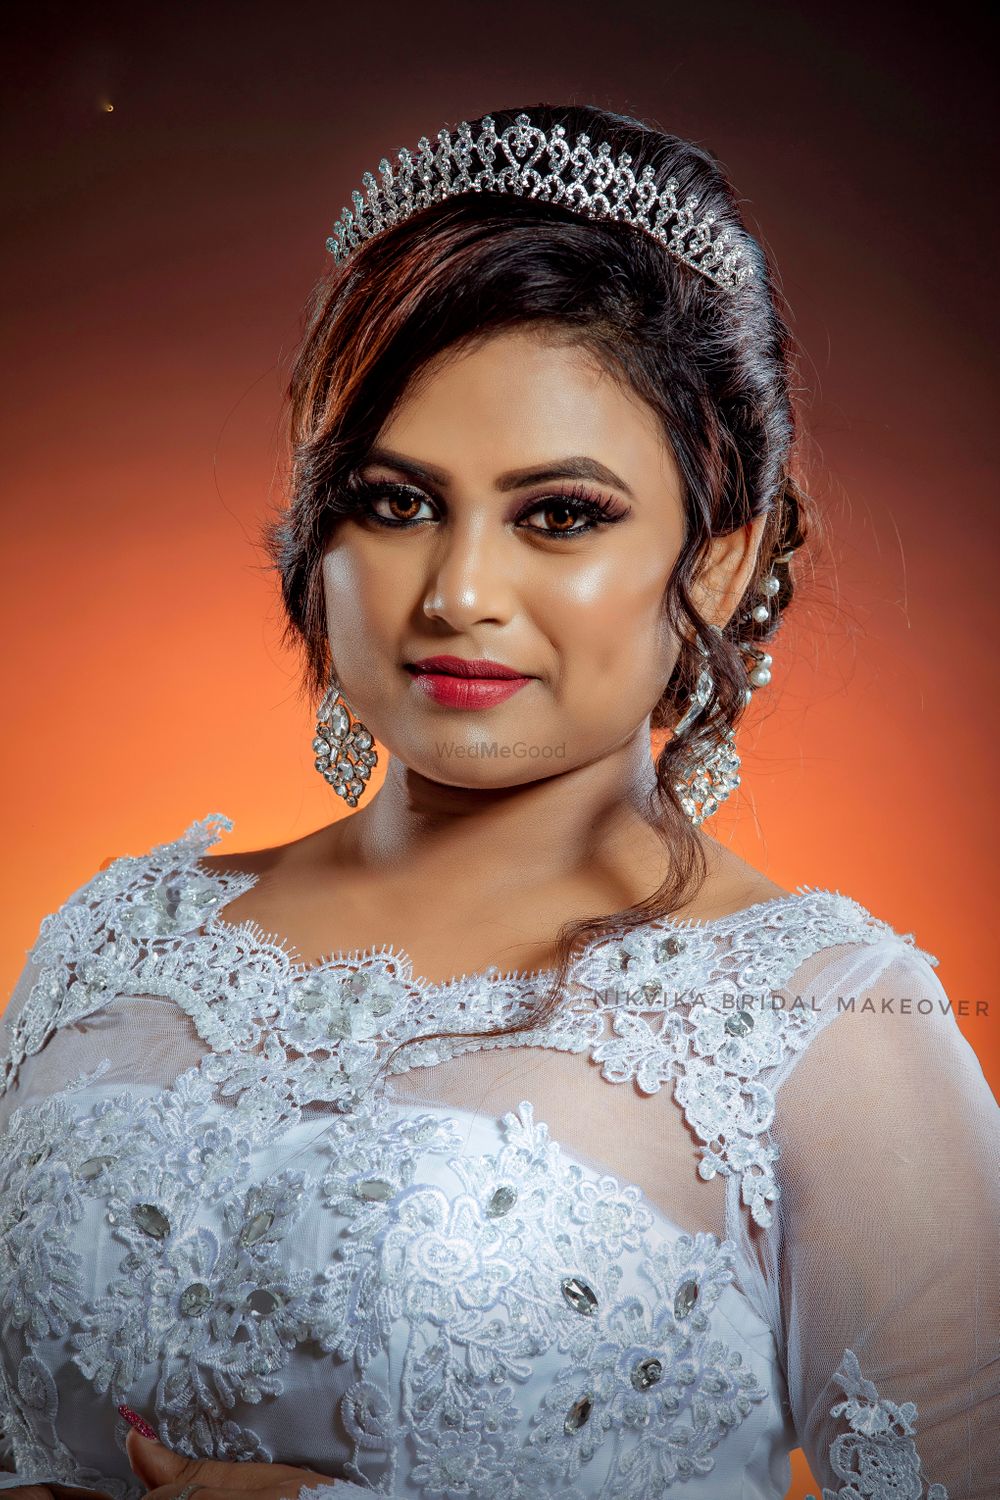 Photo From Christian Bridal Makeover - By Nikvika Bridal Makeover